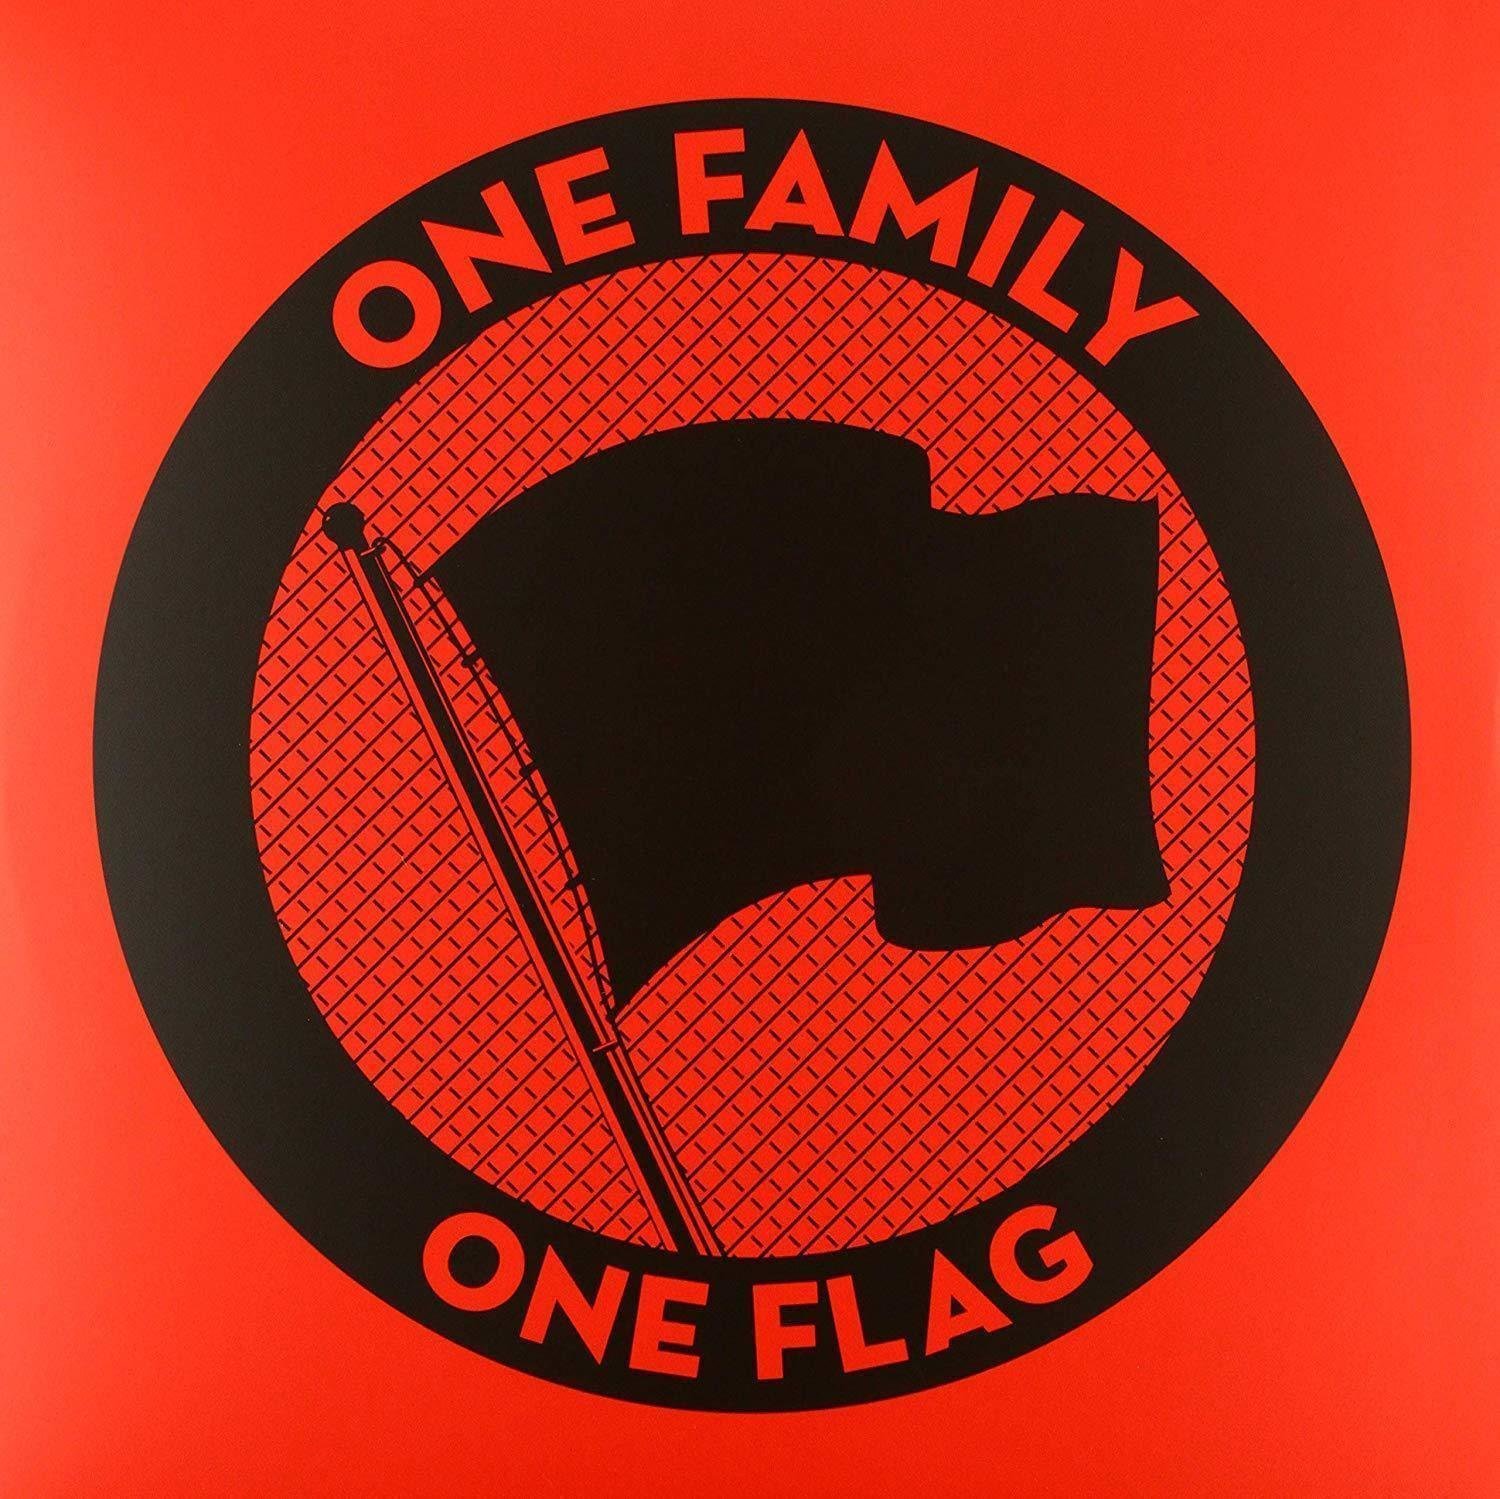 Vinyl Record Various Artists - One Family. One Flag. (3 LP)